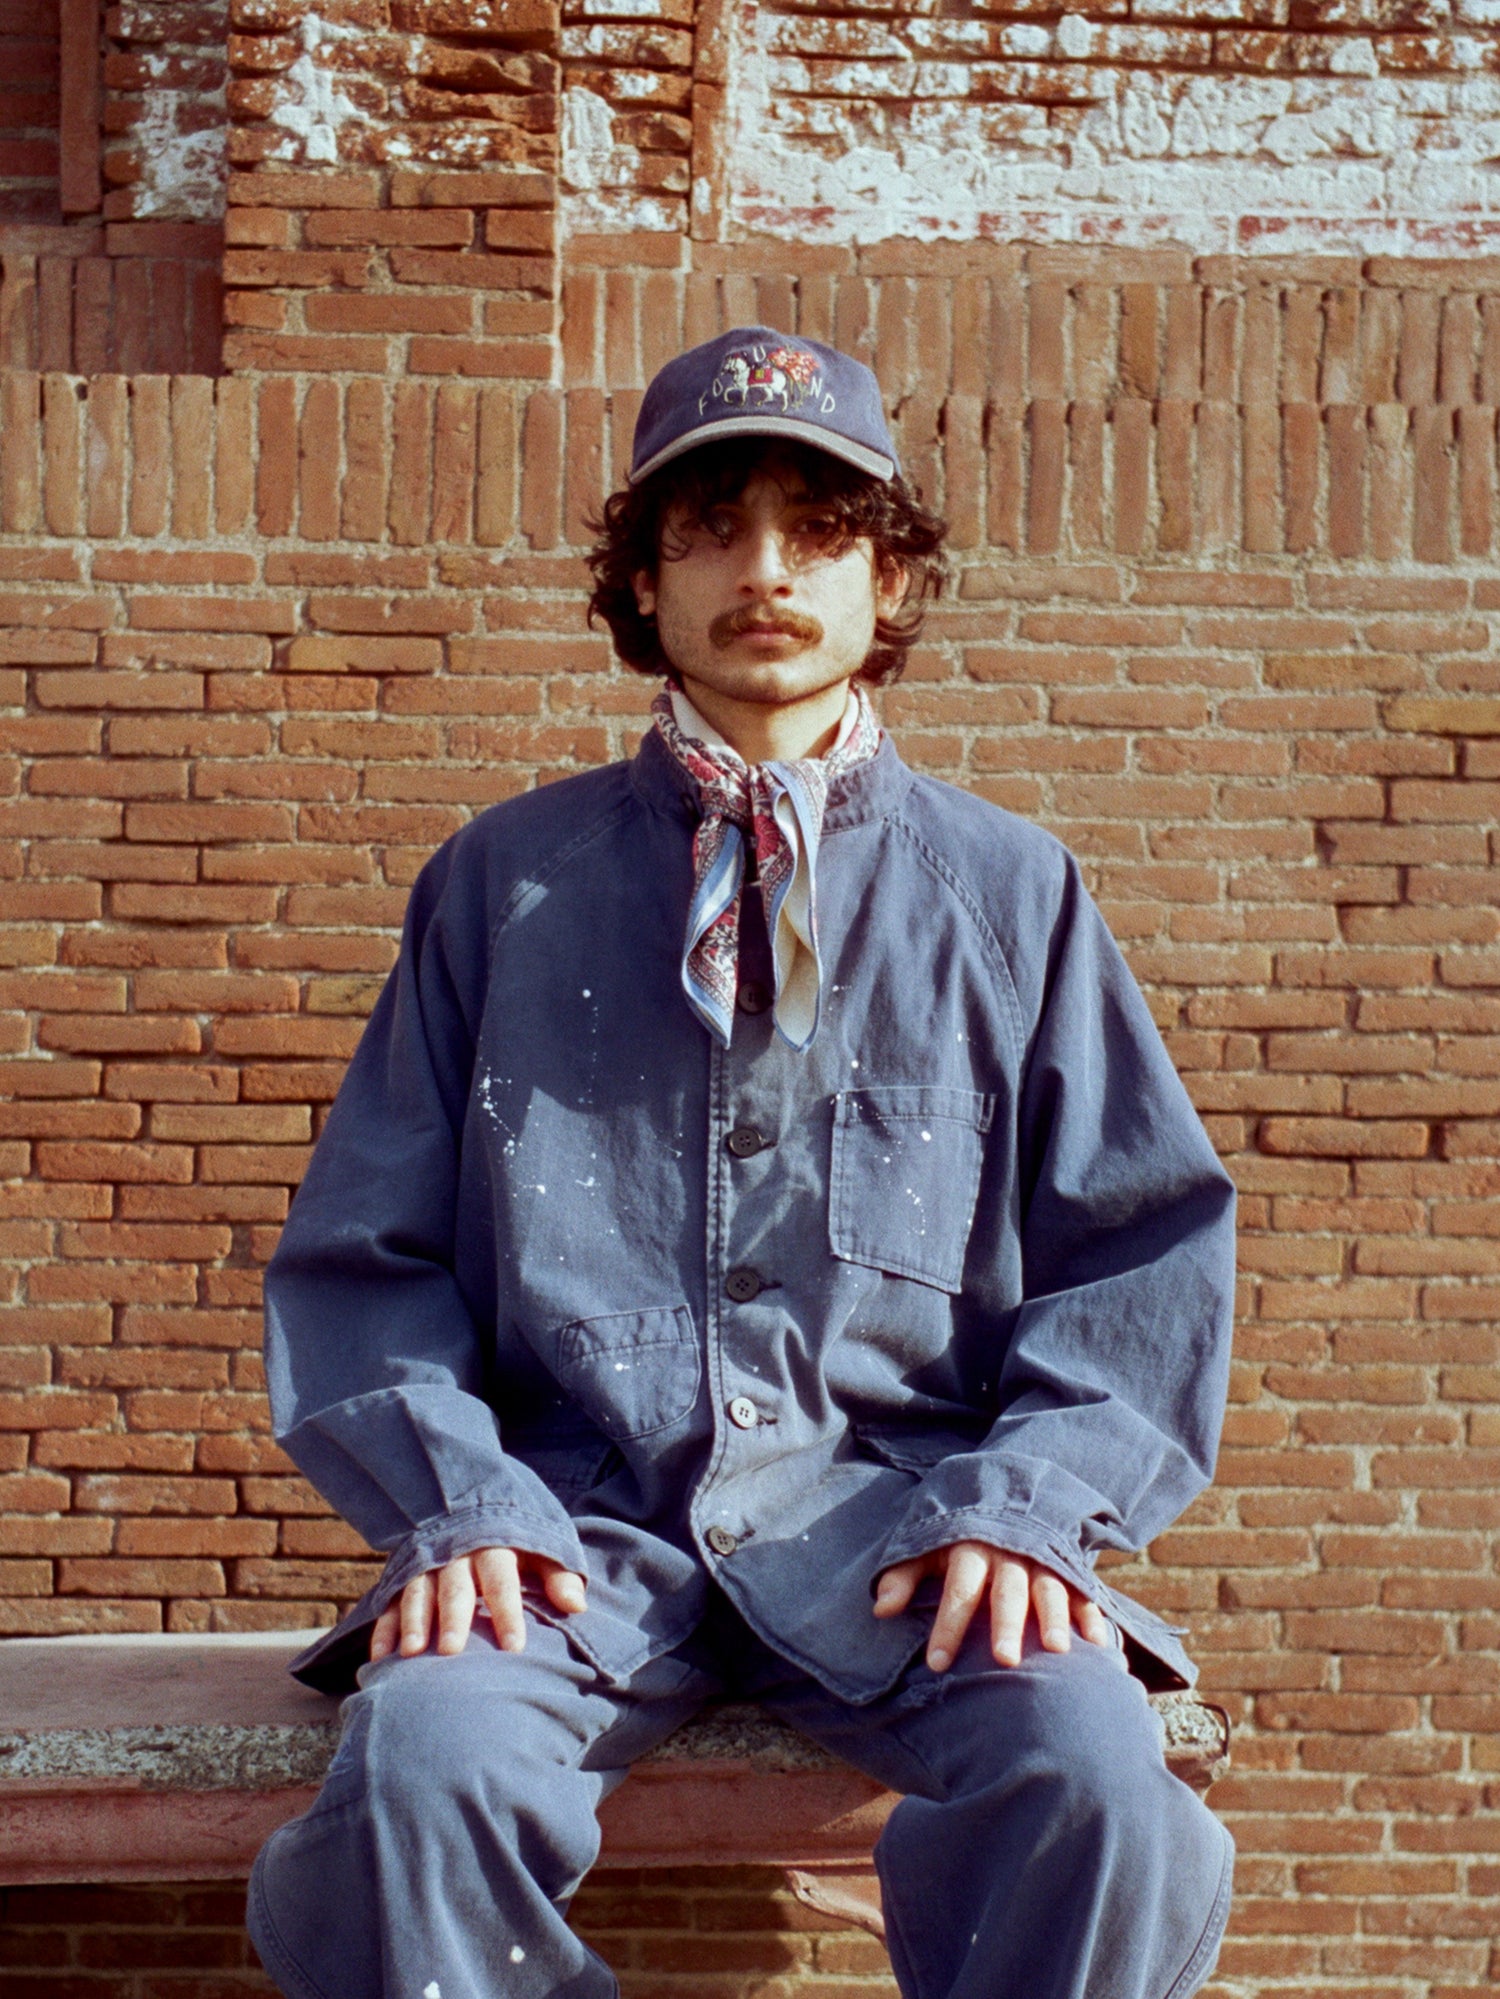 A man dressed in a River Painters Chore Coat by Found is sitting on a bench in front of a brick wall.